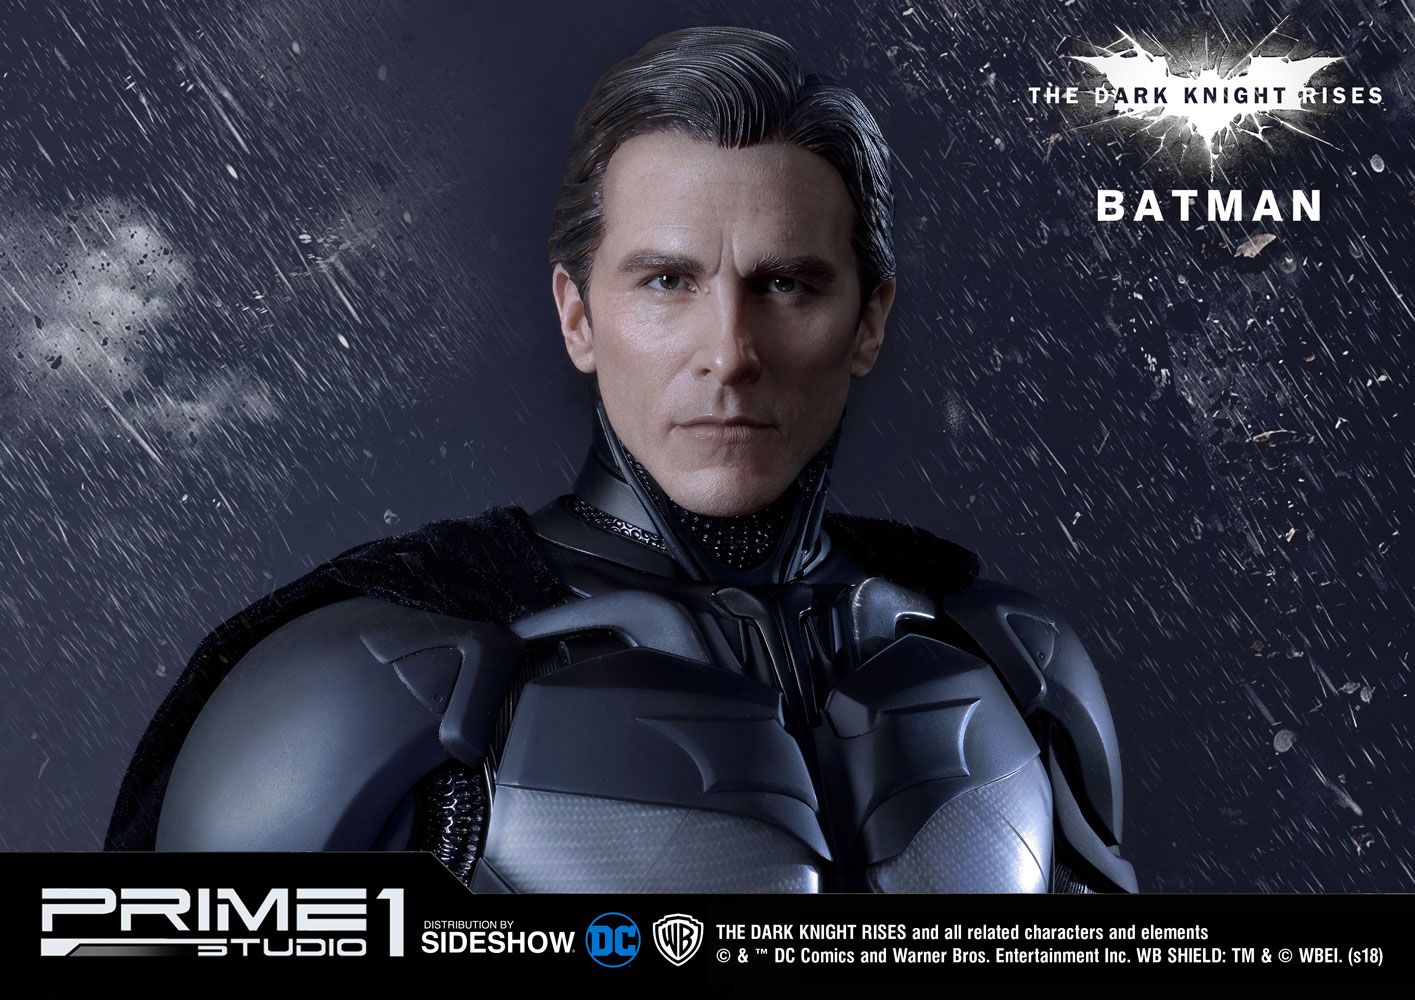 Sideshow Presents Batman Statue Without Cowl From 'The Dark Knight' Trilogy  - Dark Knight News